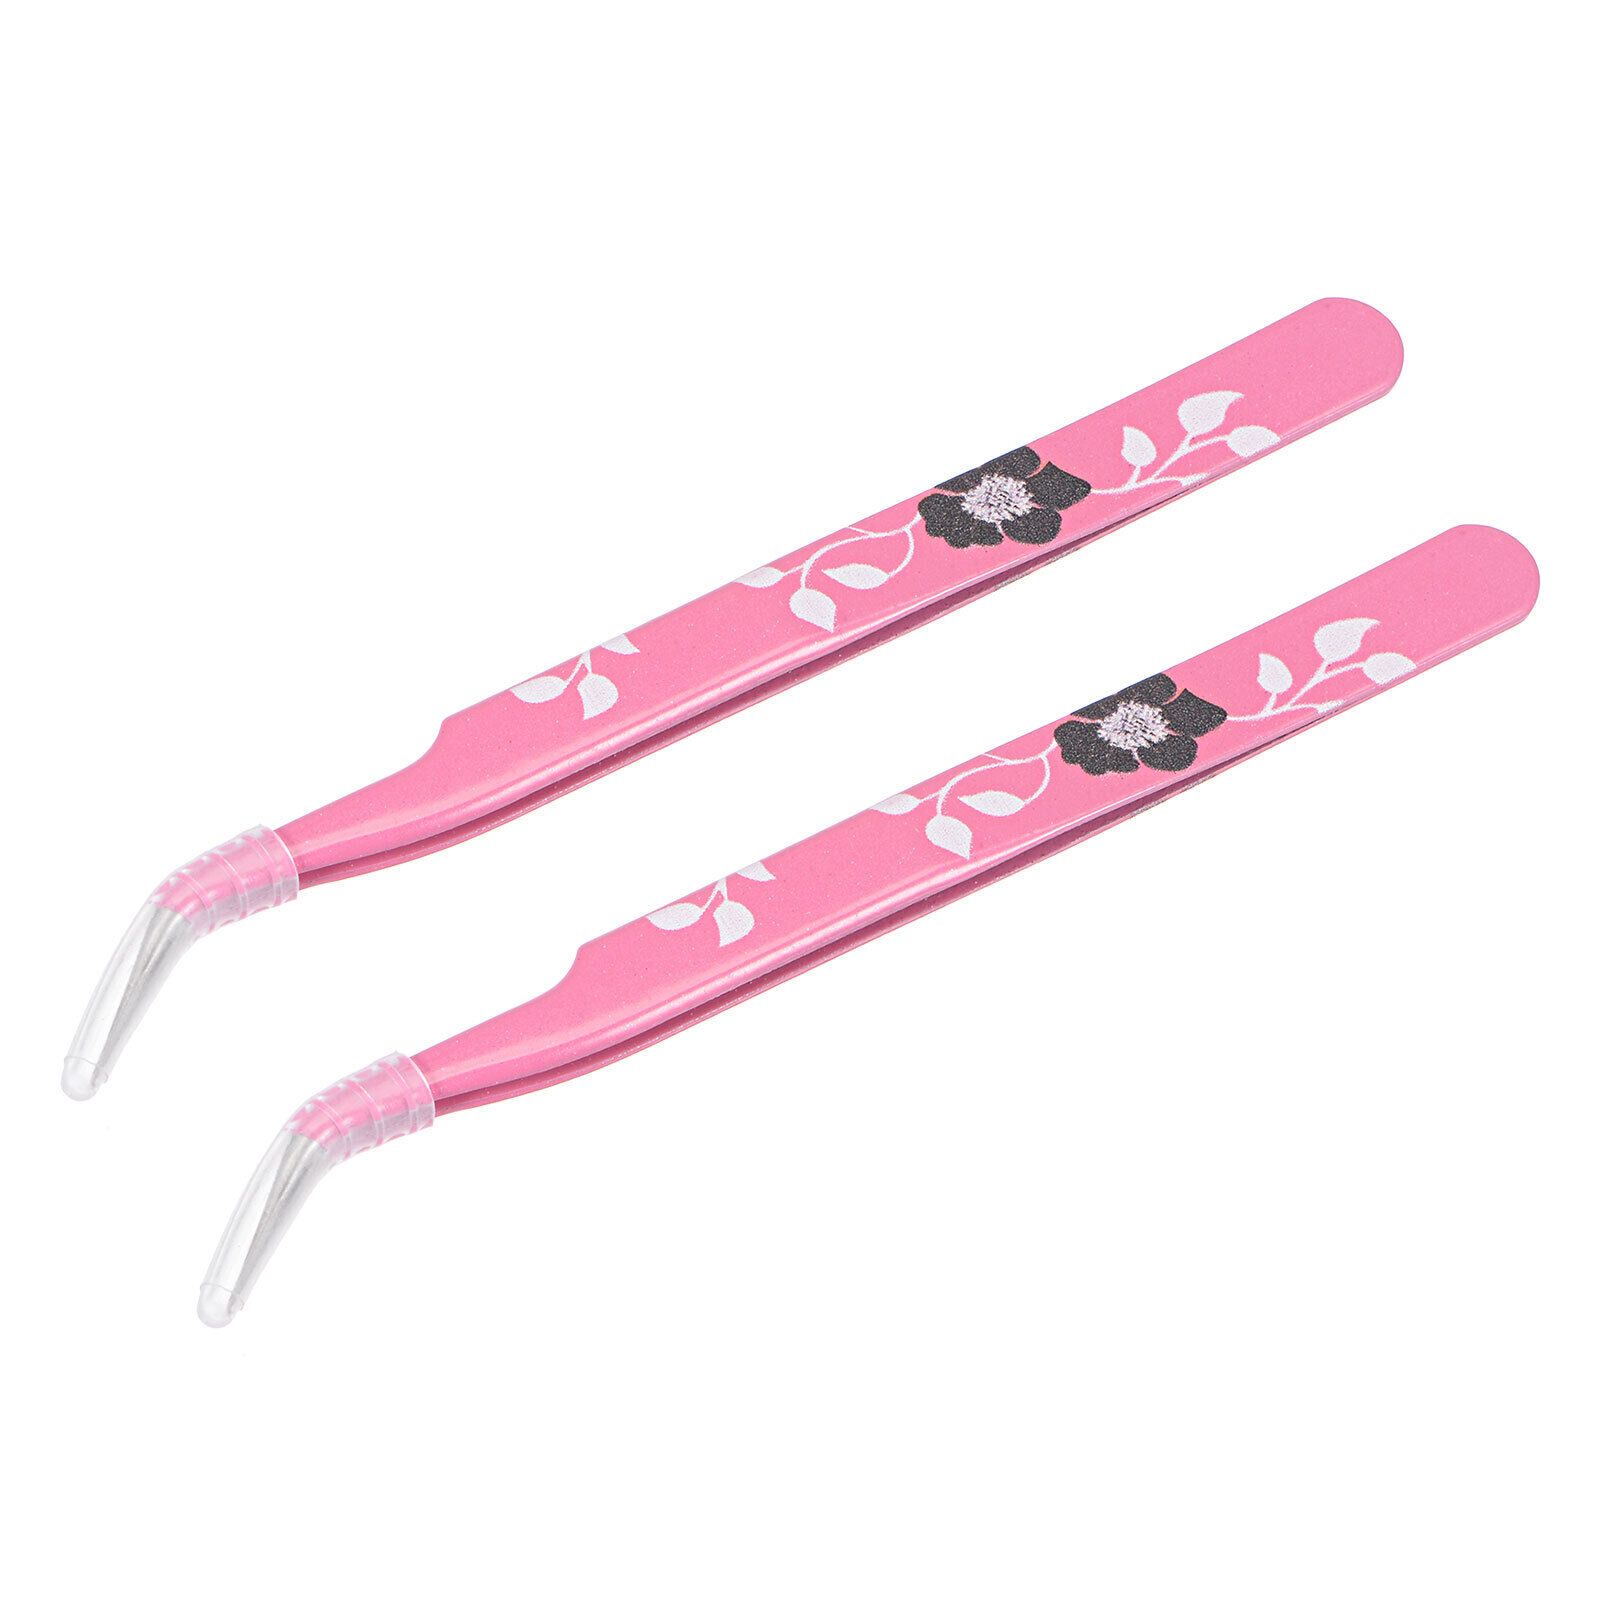 Precision Curved Tip Tweezer Stainless Steel Fuchsia With Flower Print 2pcs